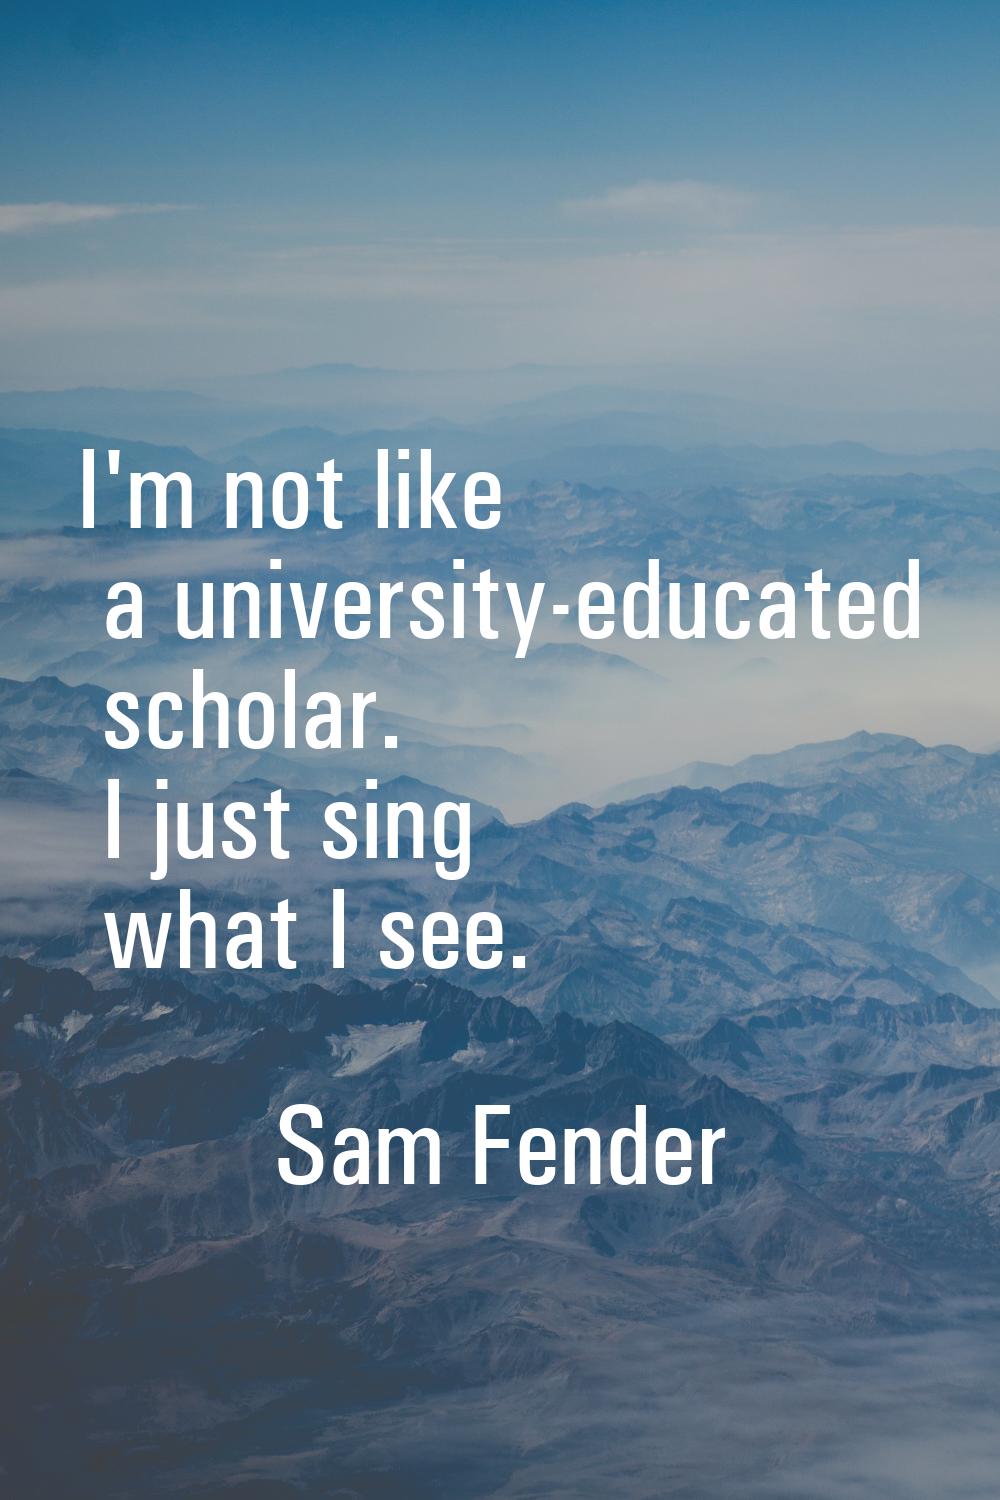 I'm not like a university-educated scholar. I just sing what I see.